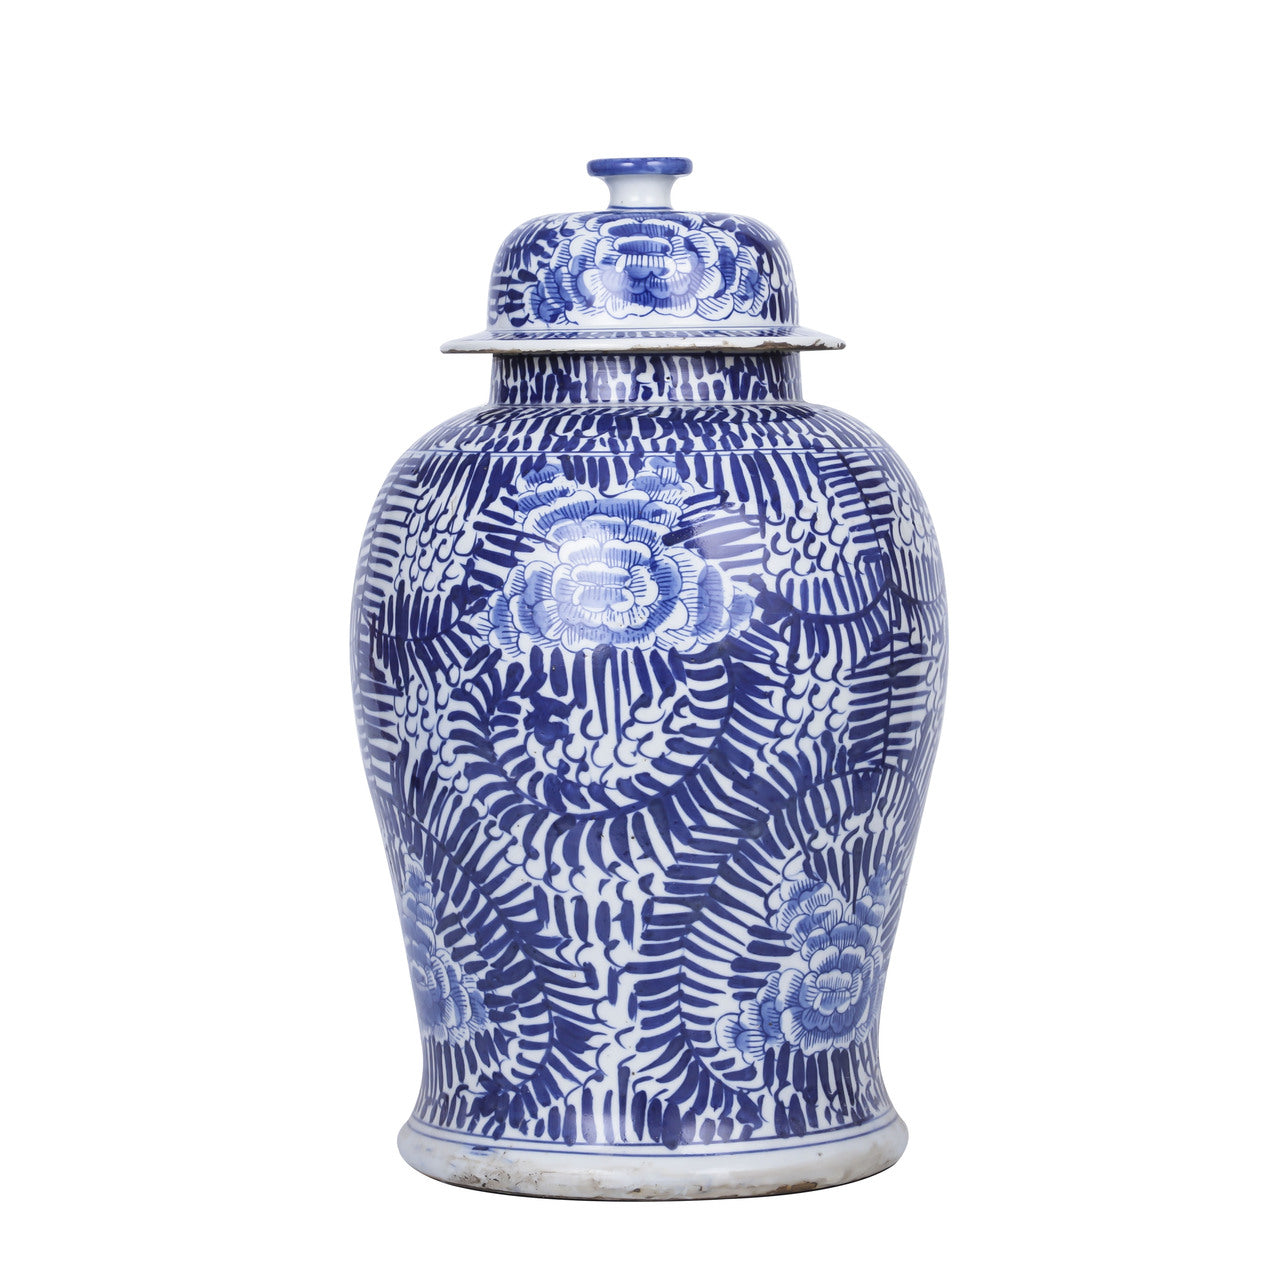 Blue and White Feathered Peony Porcelain Temple Jar